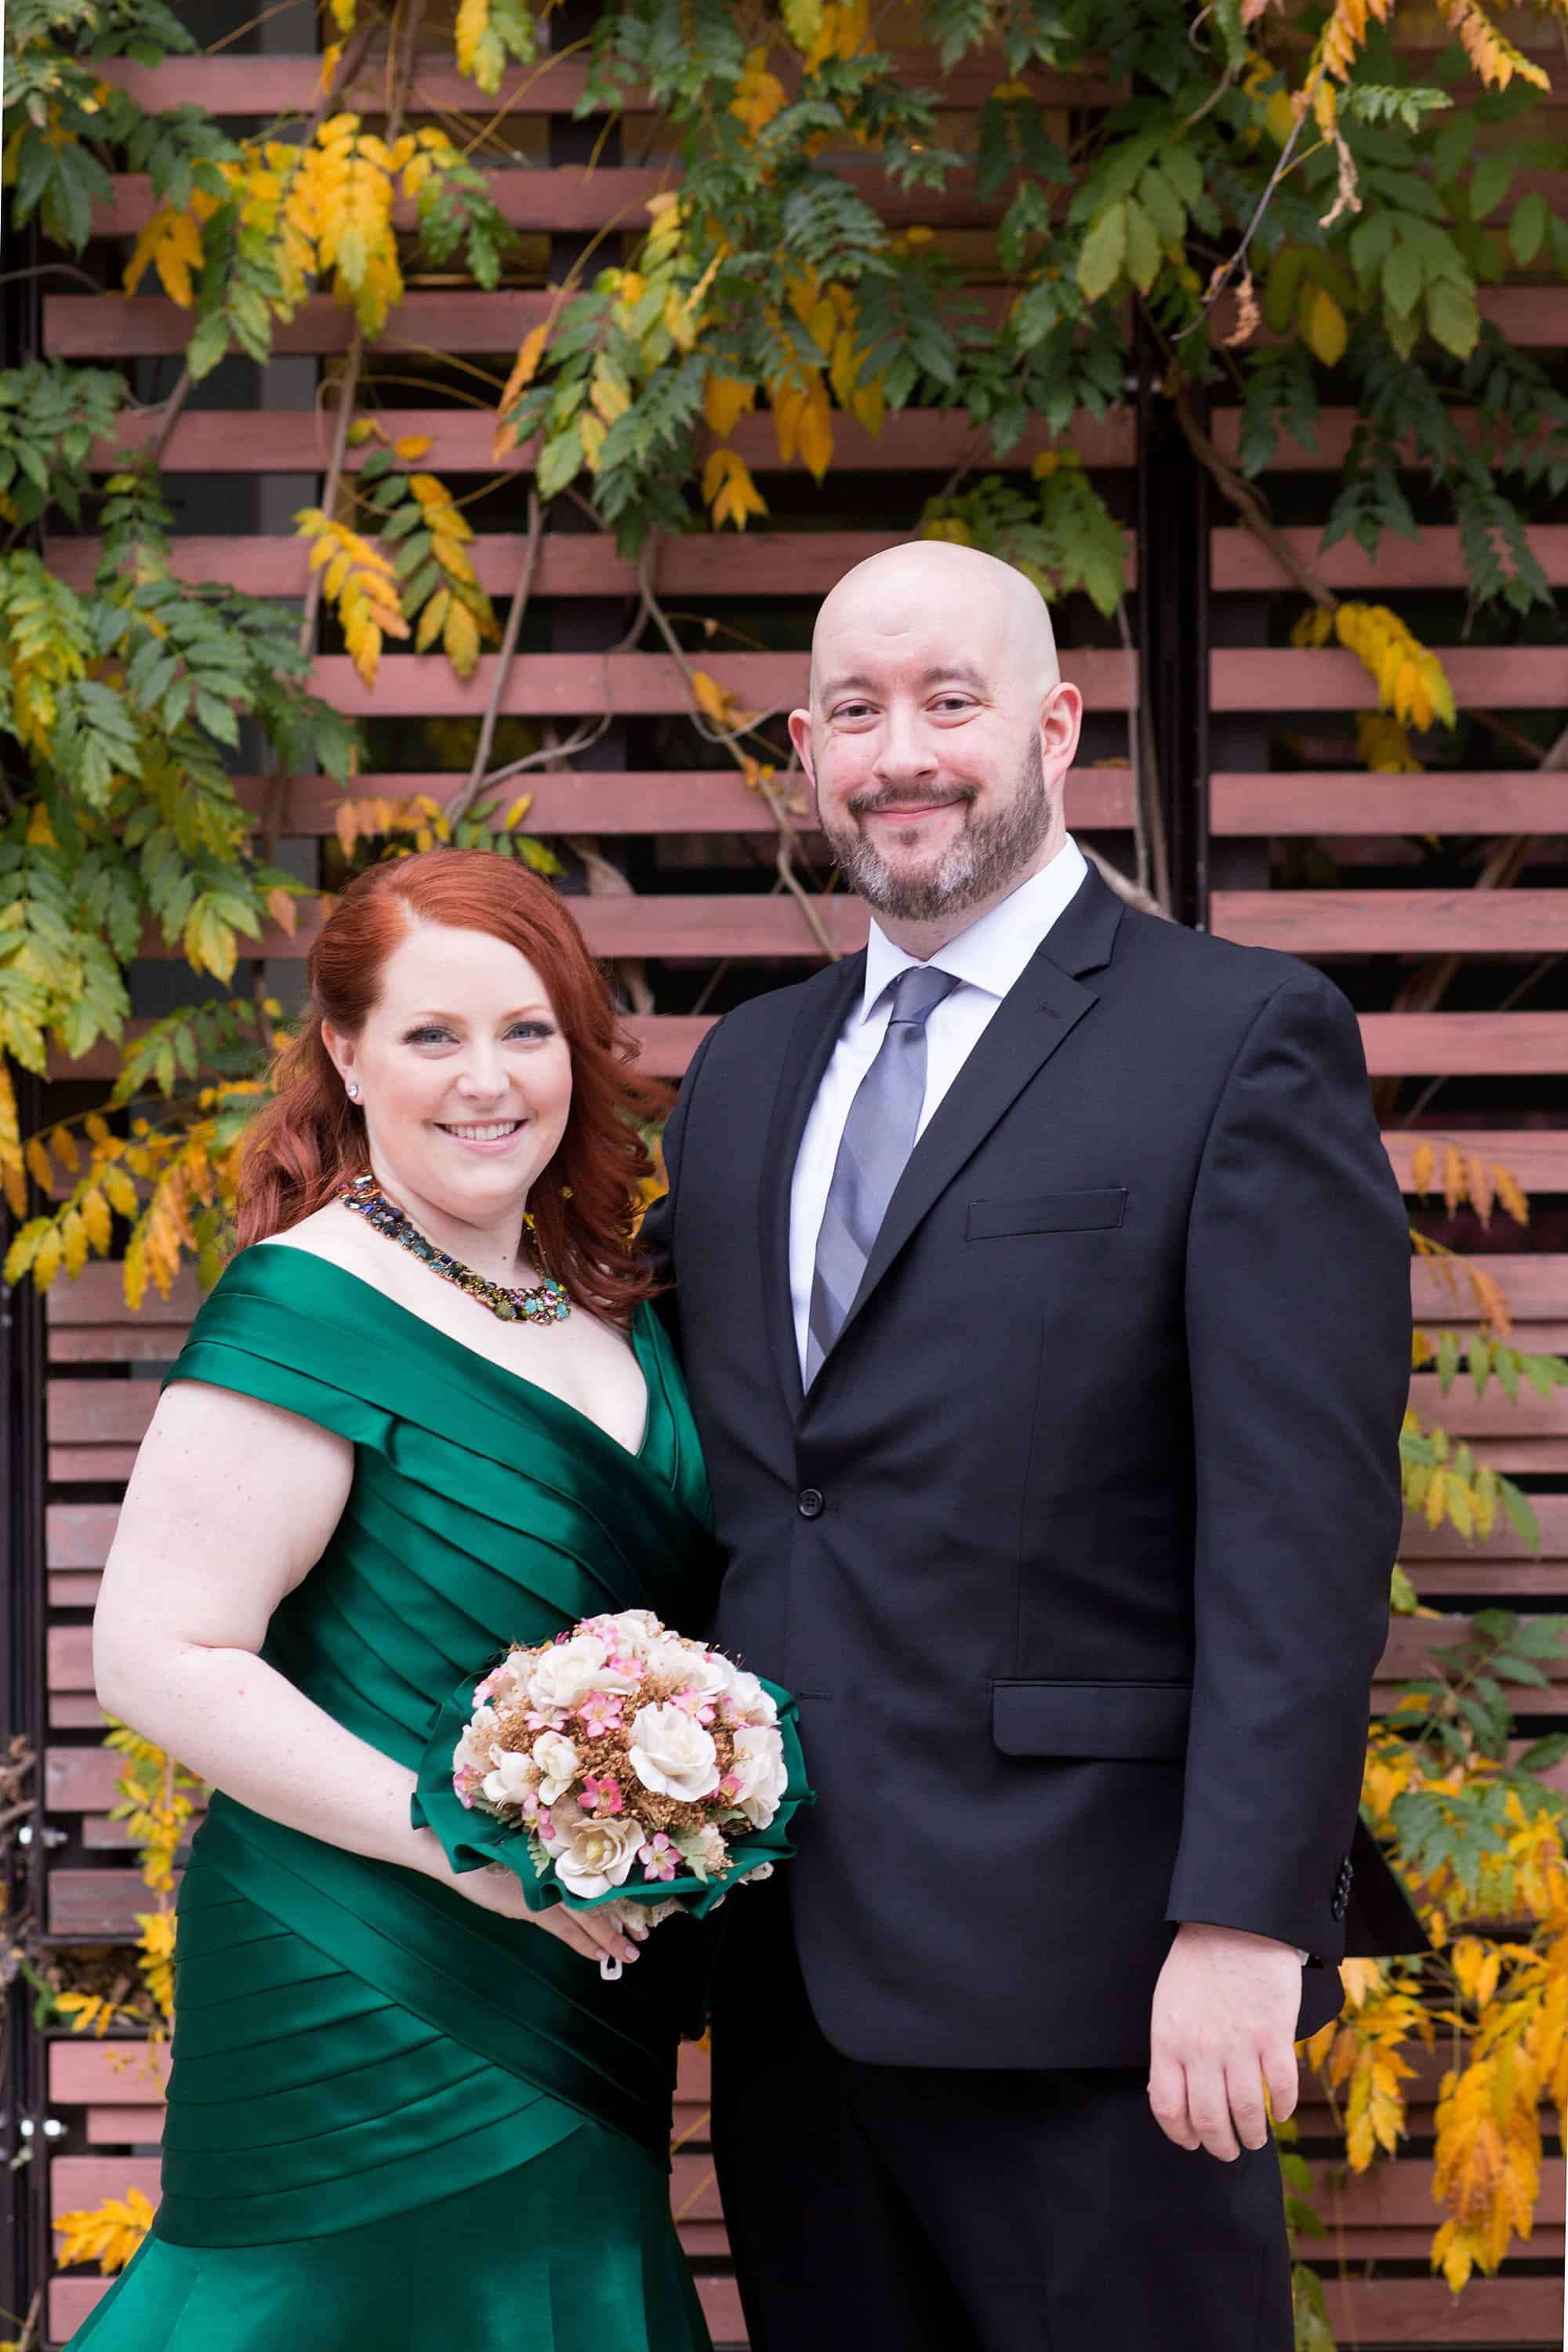 Morris museum nj fall wedding outdoor bride and groom portrait holding hands couple newlyweds